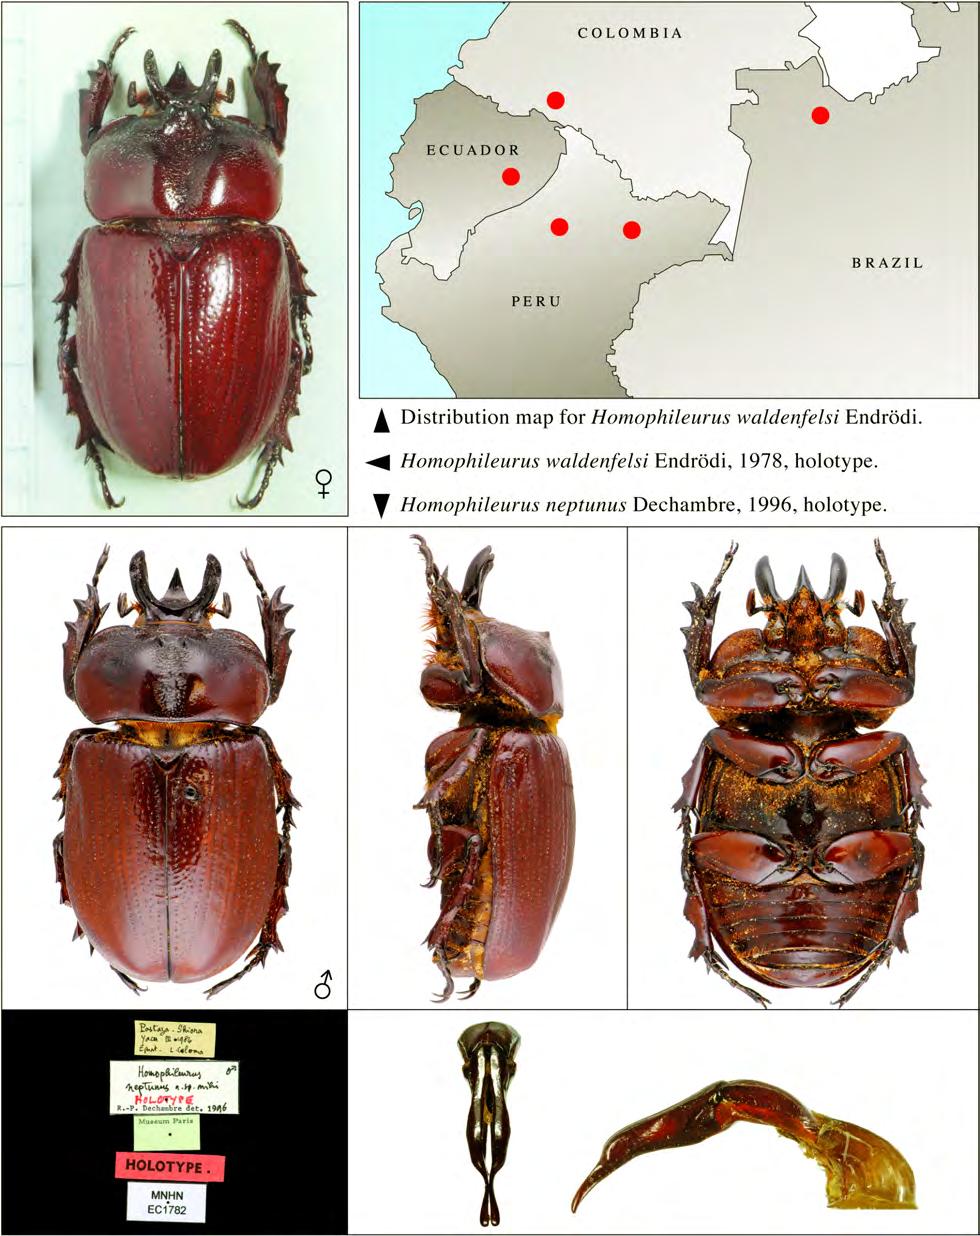 SYNONYMY IN HOMOPHILEURUS INSECTA MUNDI 0146, October 2010 3 Plate 1.